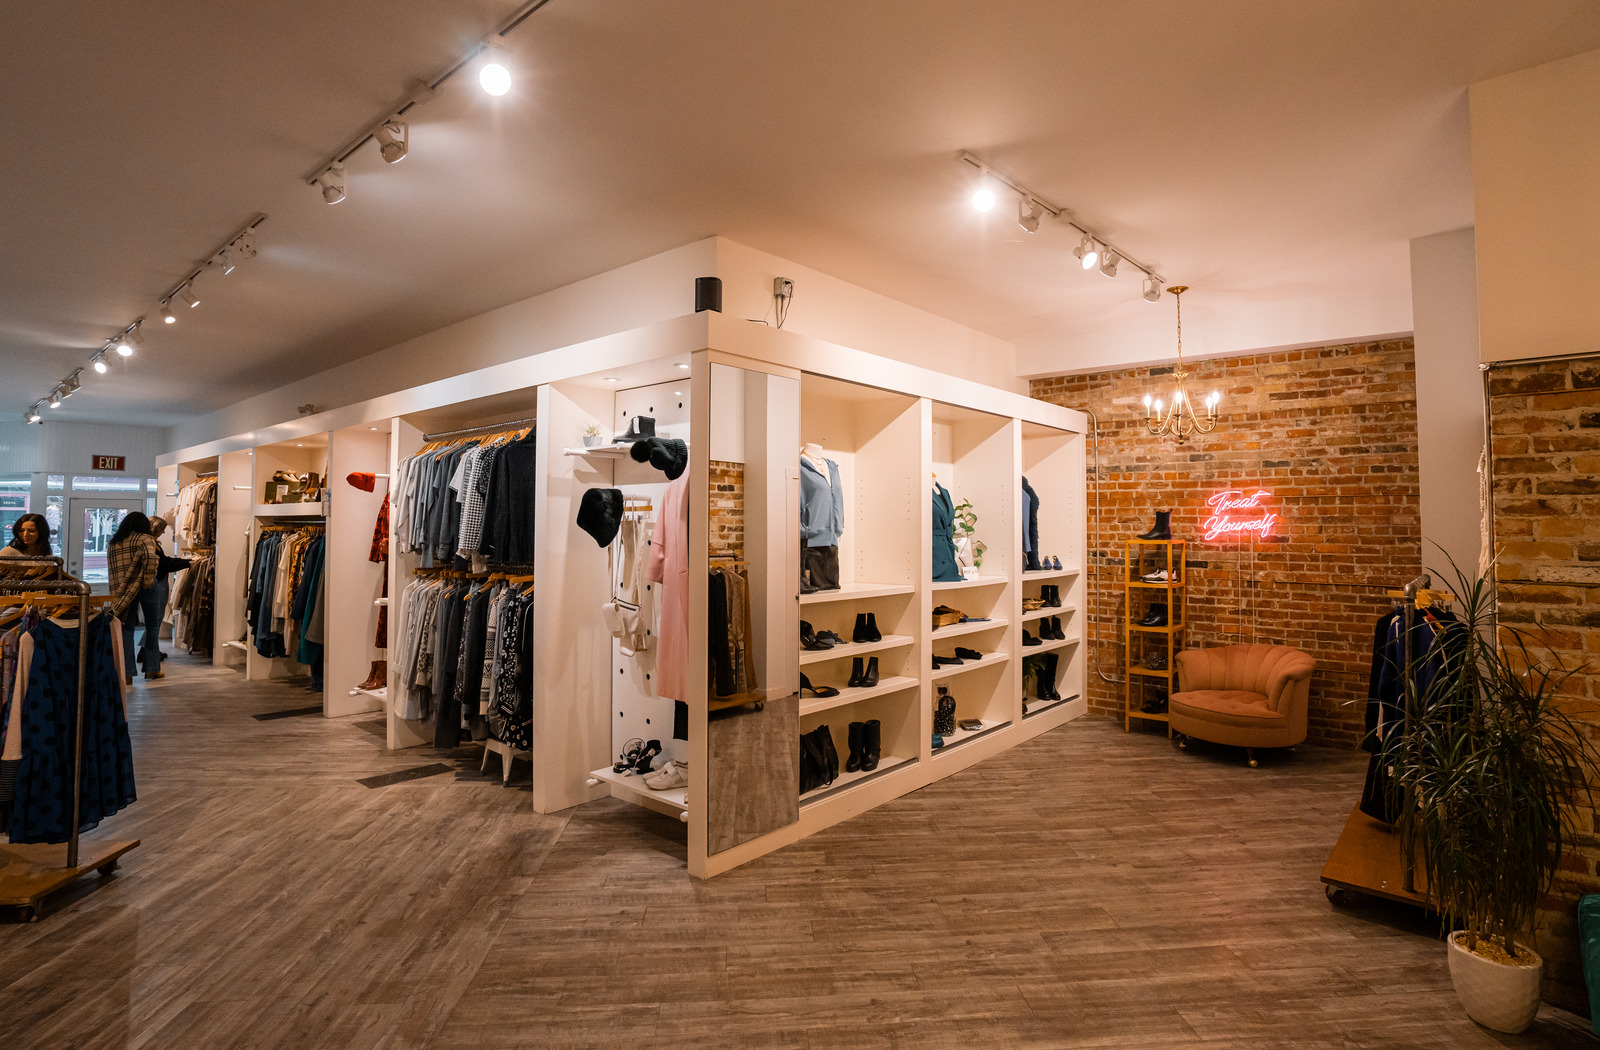 An interior view of The Peacock Boutique Consignment, with an assortment of shoes, accessories, blouses, shirts, and other clothing displayed on shelves and hangers.